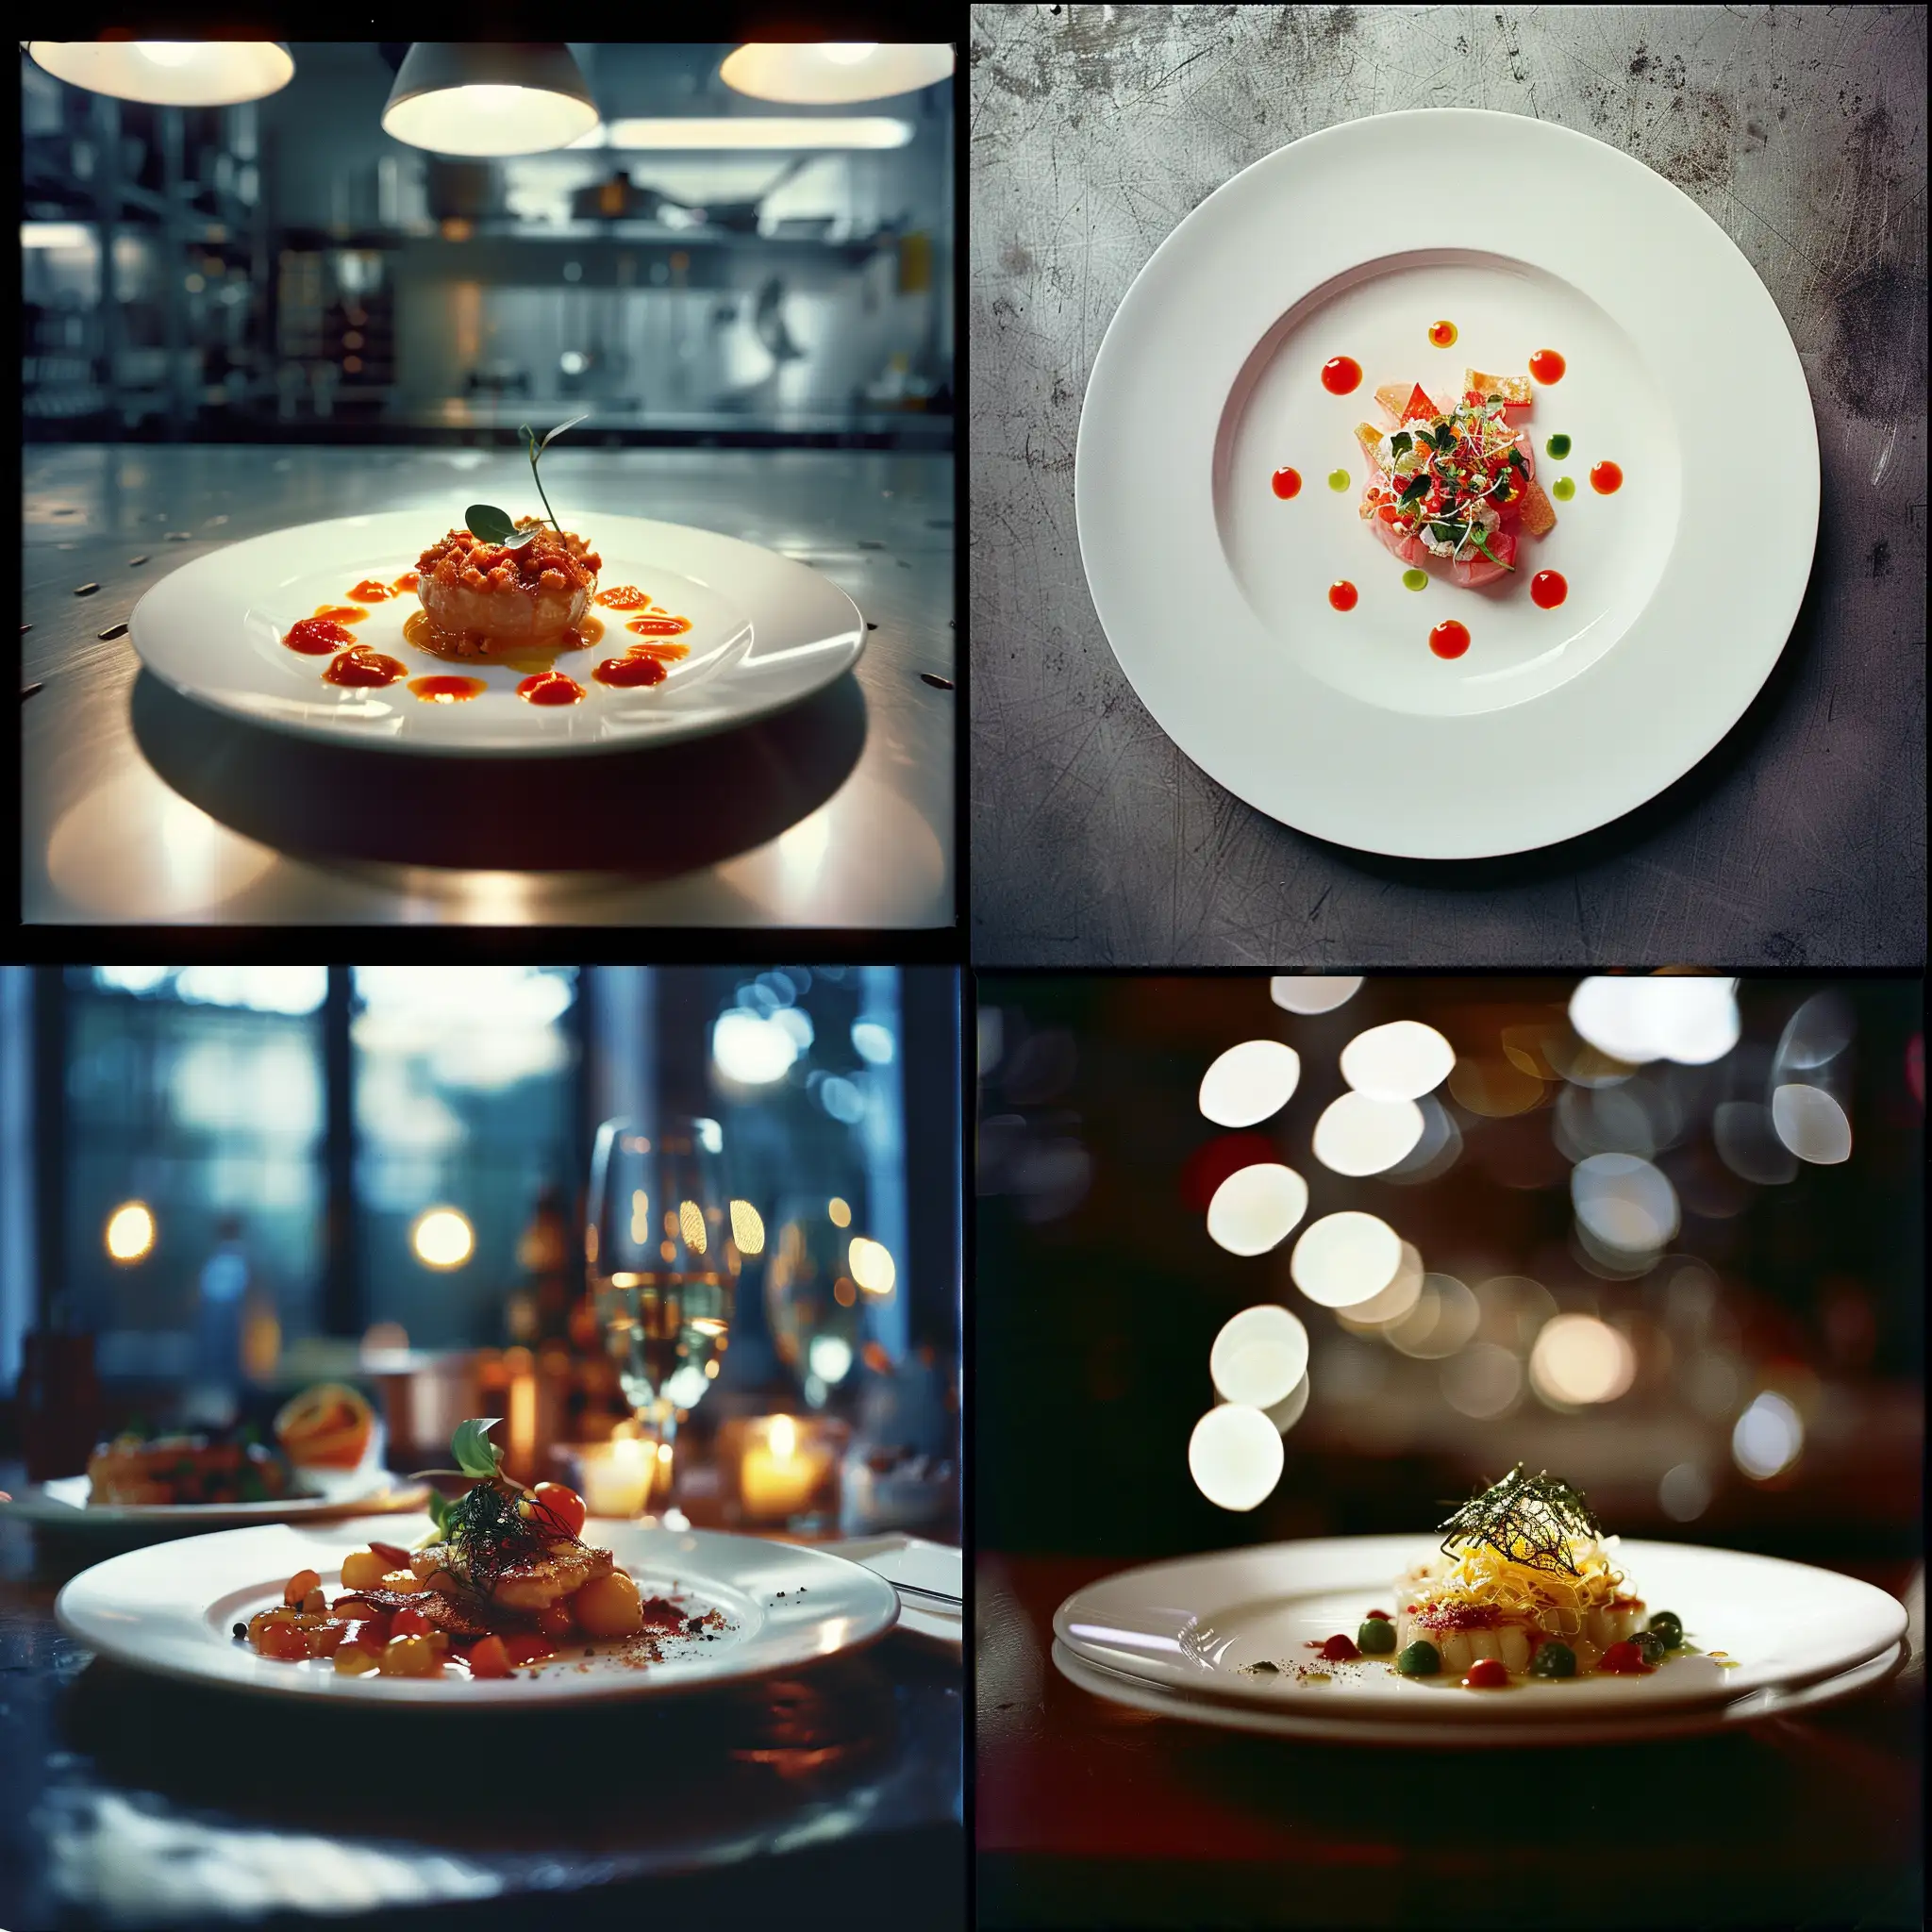 Exquisite-Gourmet-Dish-on-White-Plate-in-Dimly-Lit-Studio-Setting